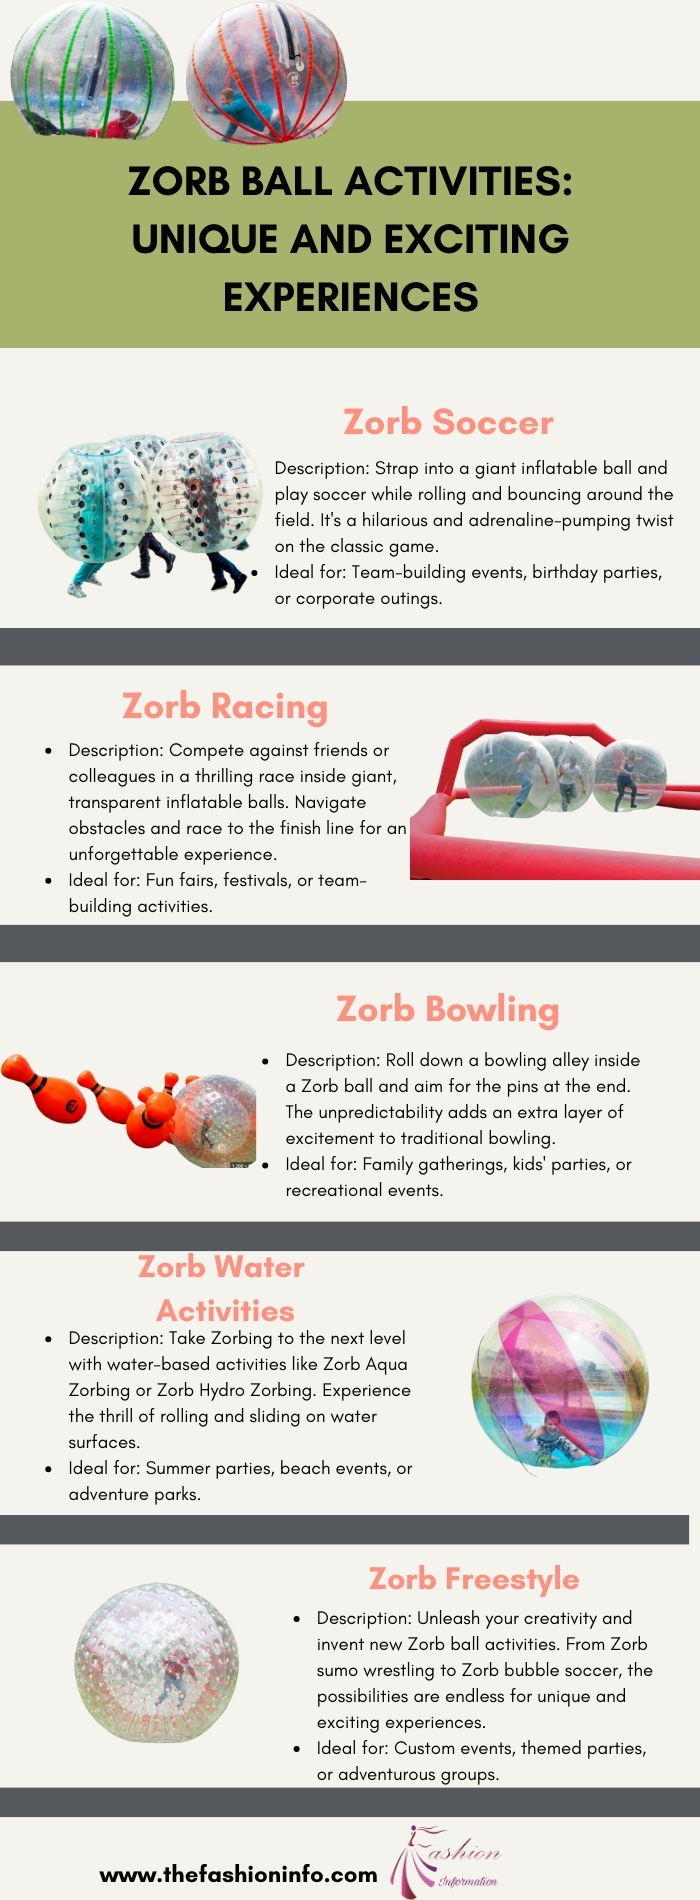 Zorb Ball Activities: Unique and Exciting Experiences